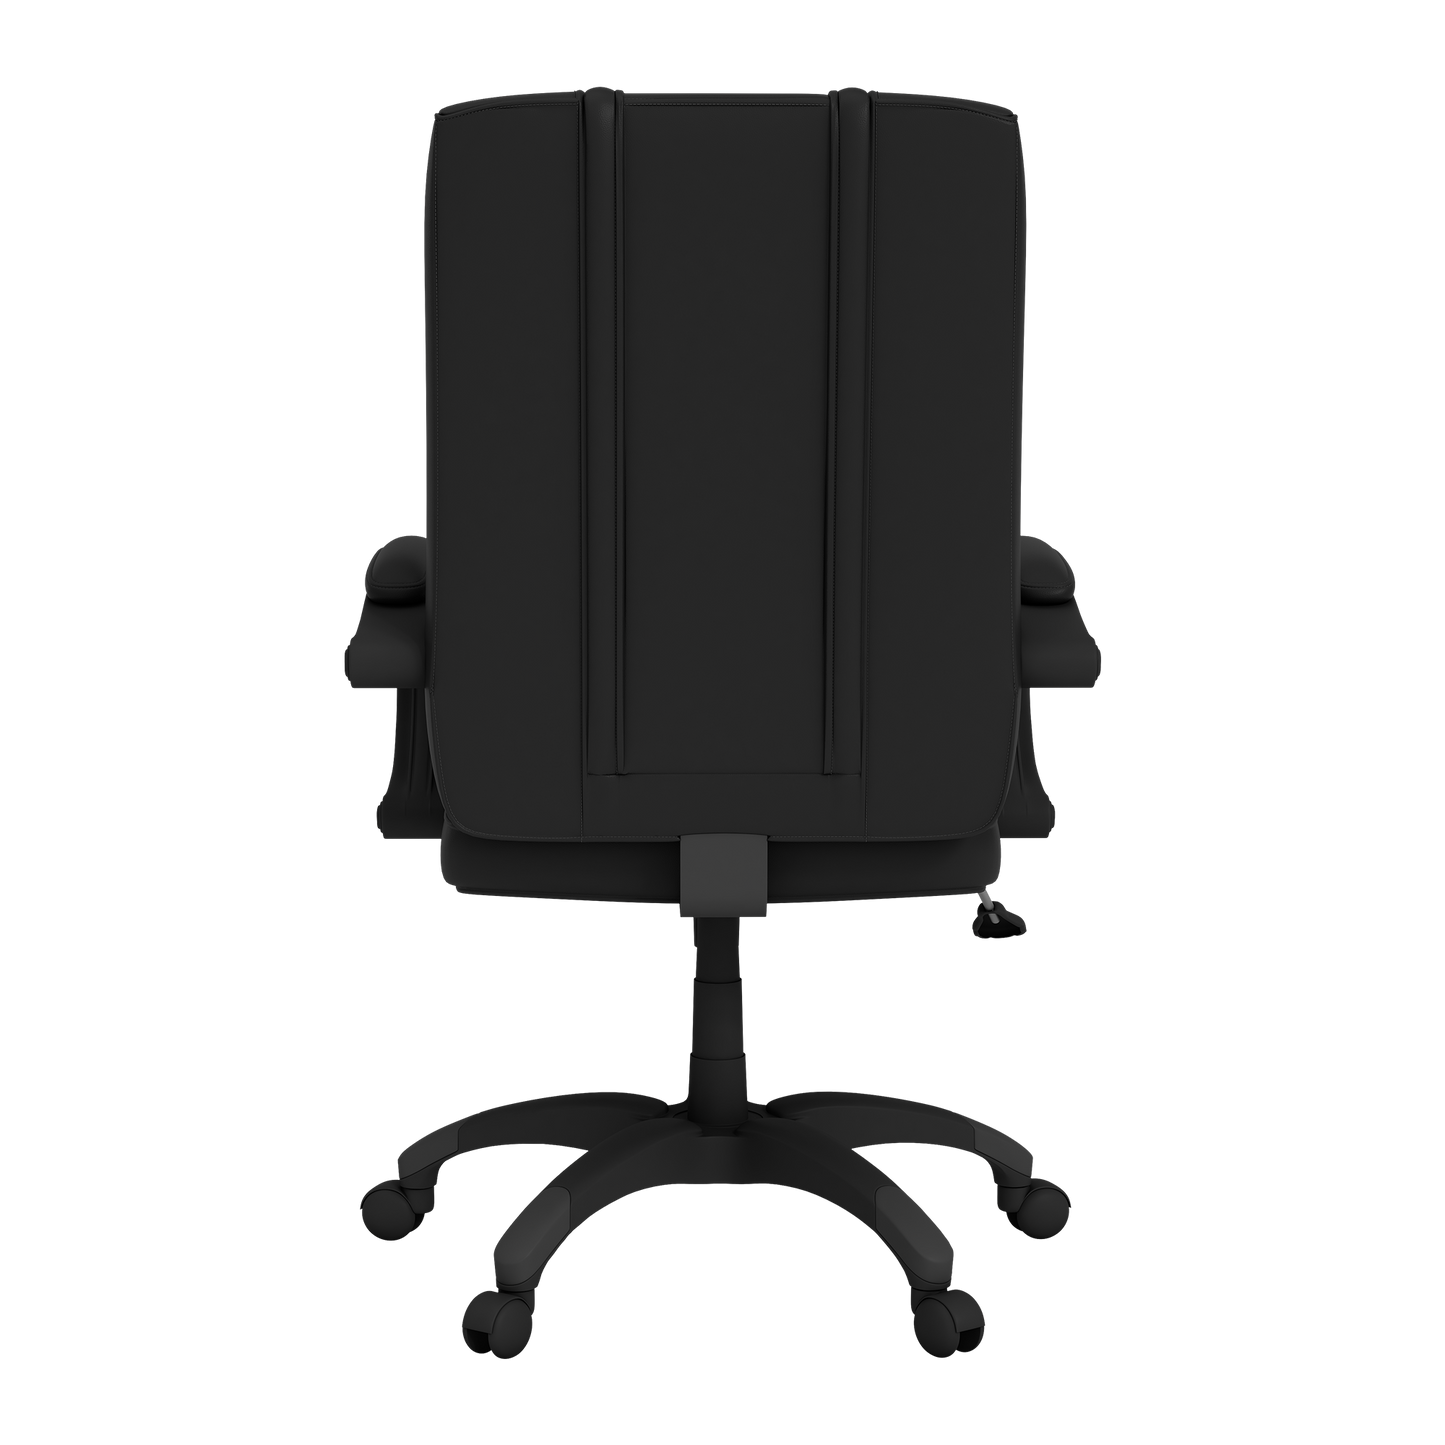 Office Chair 1000 with Vancouver Canucks Logo